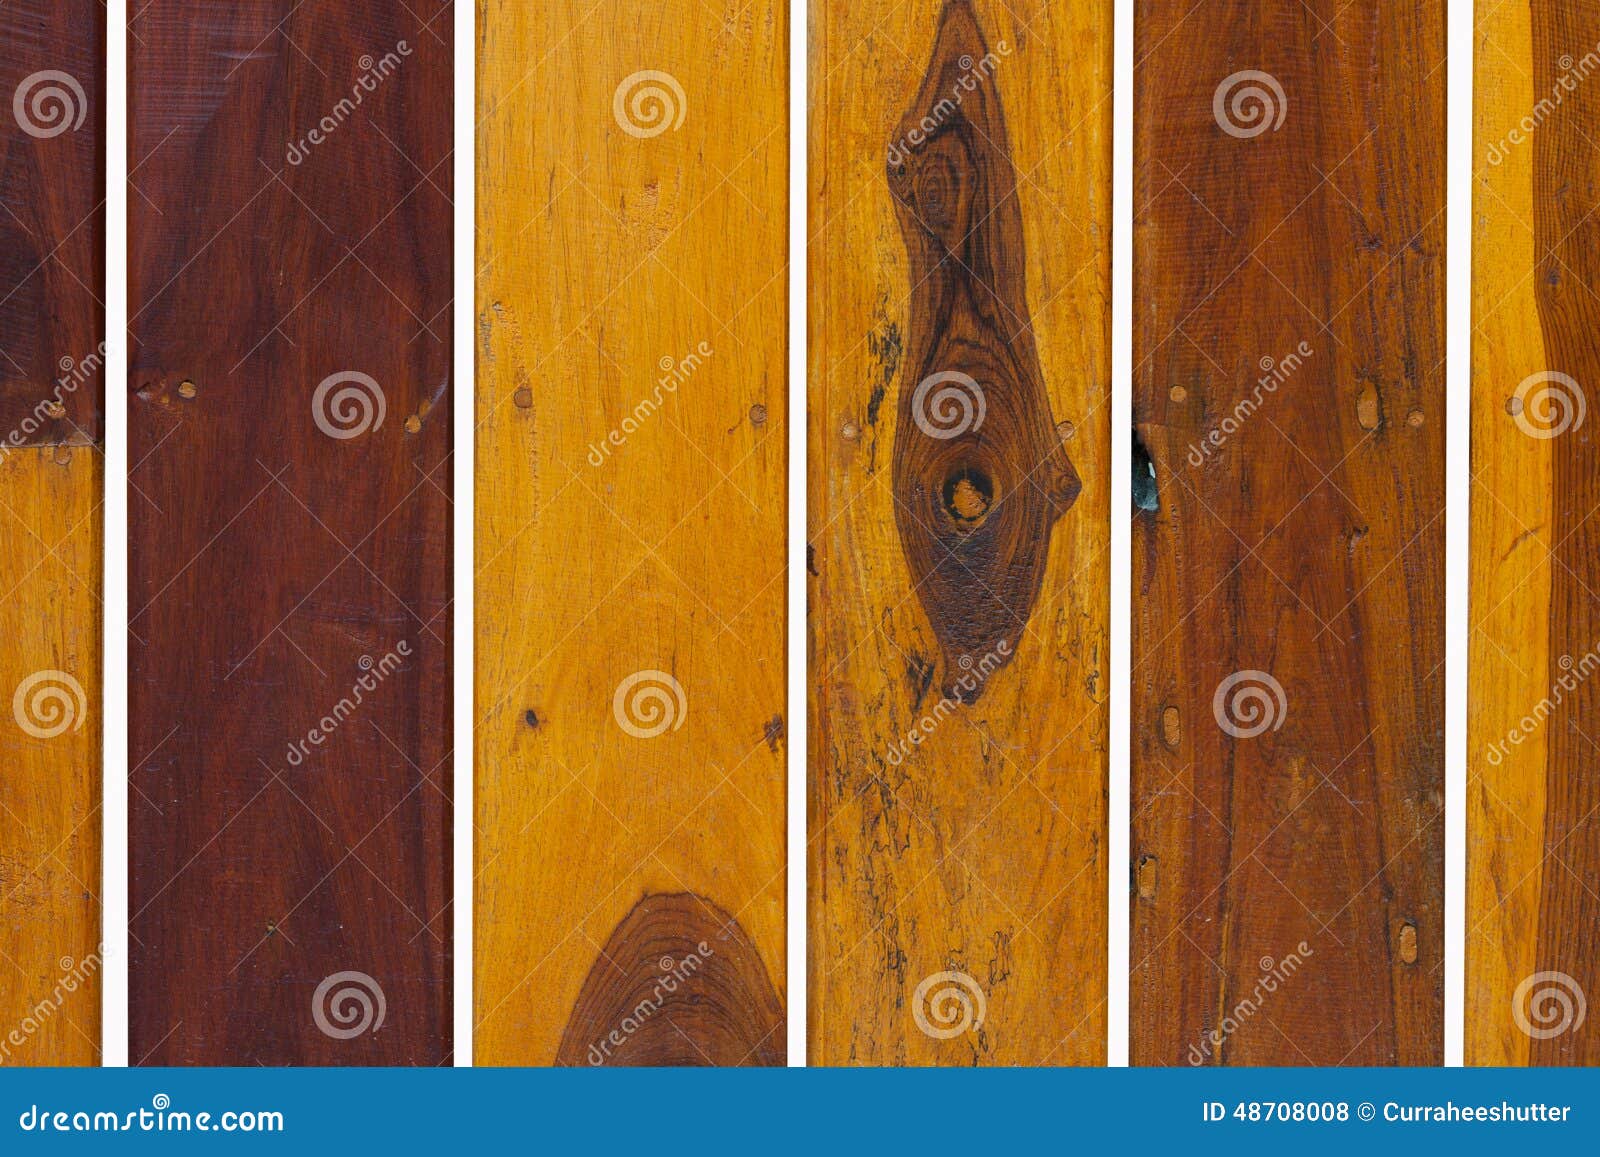 real wood samples of rosewood, abstract background of rosewood.